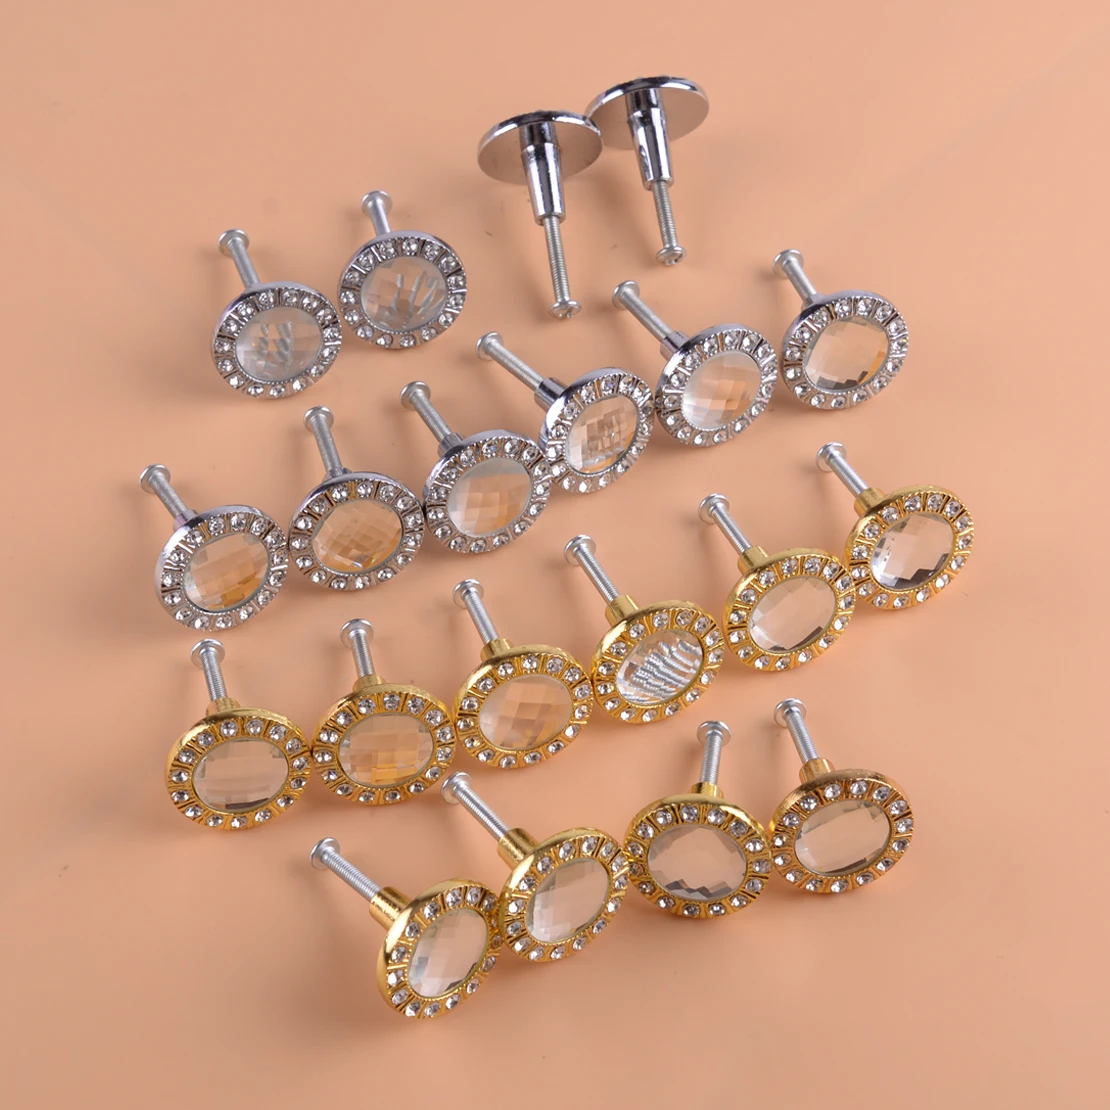 

LETAOSK 10Pcs Gold/Silver 30mm Diamond Shape Crystal Glass Cabinet Knob Cupboard Drawer Door Pull Handle Hardware Tools